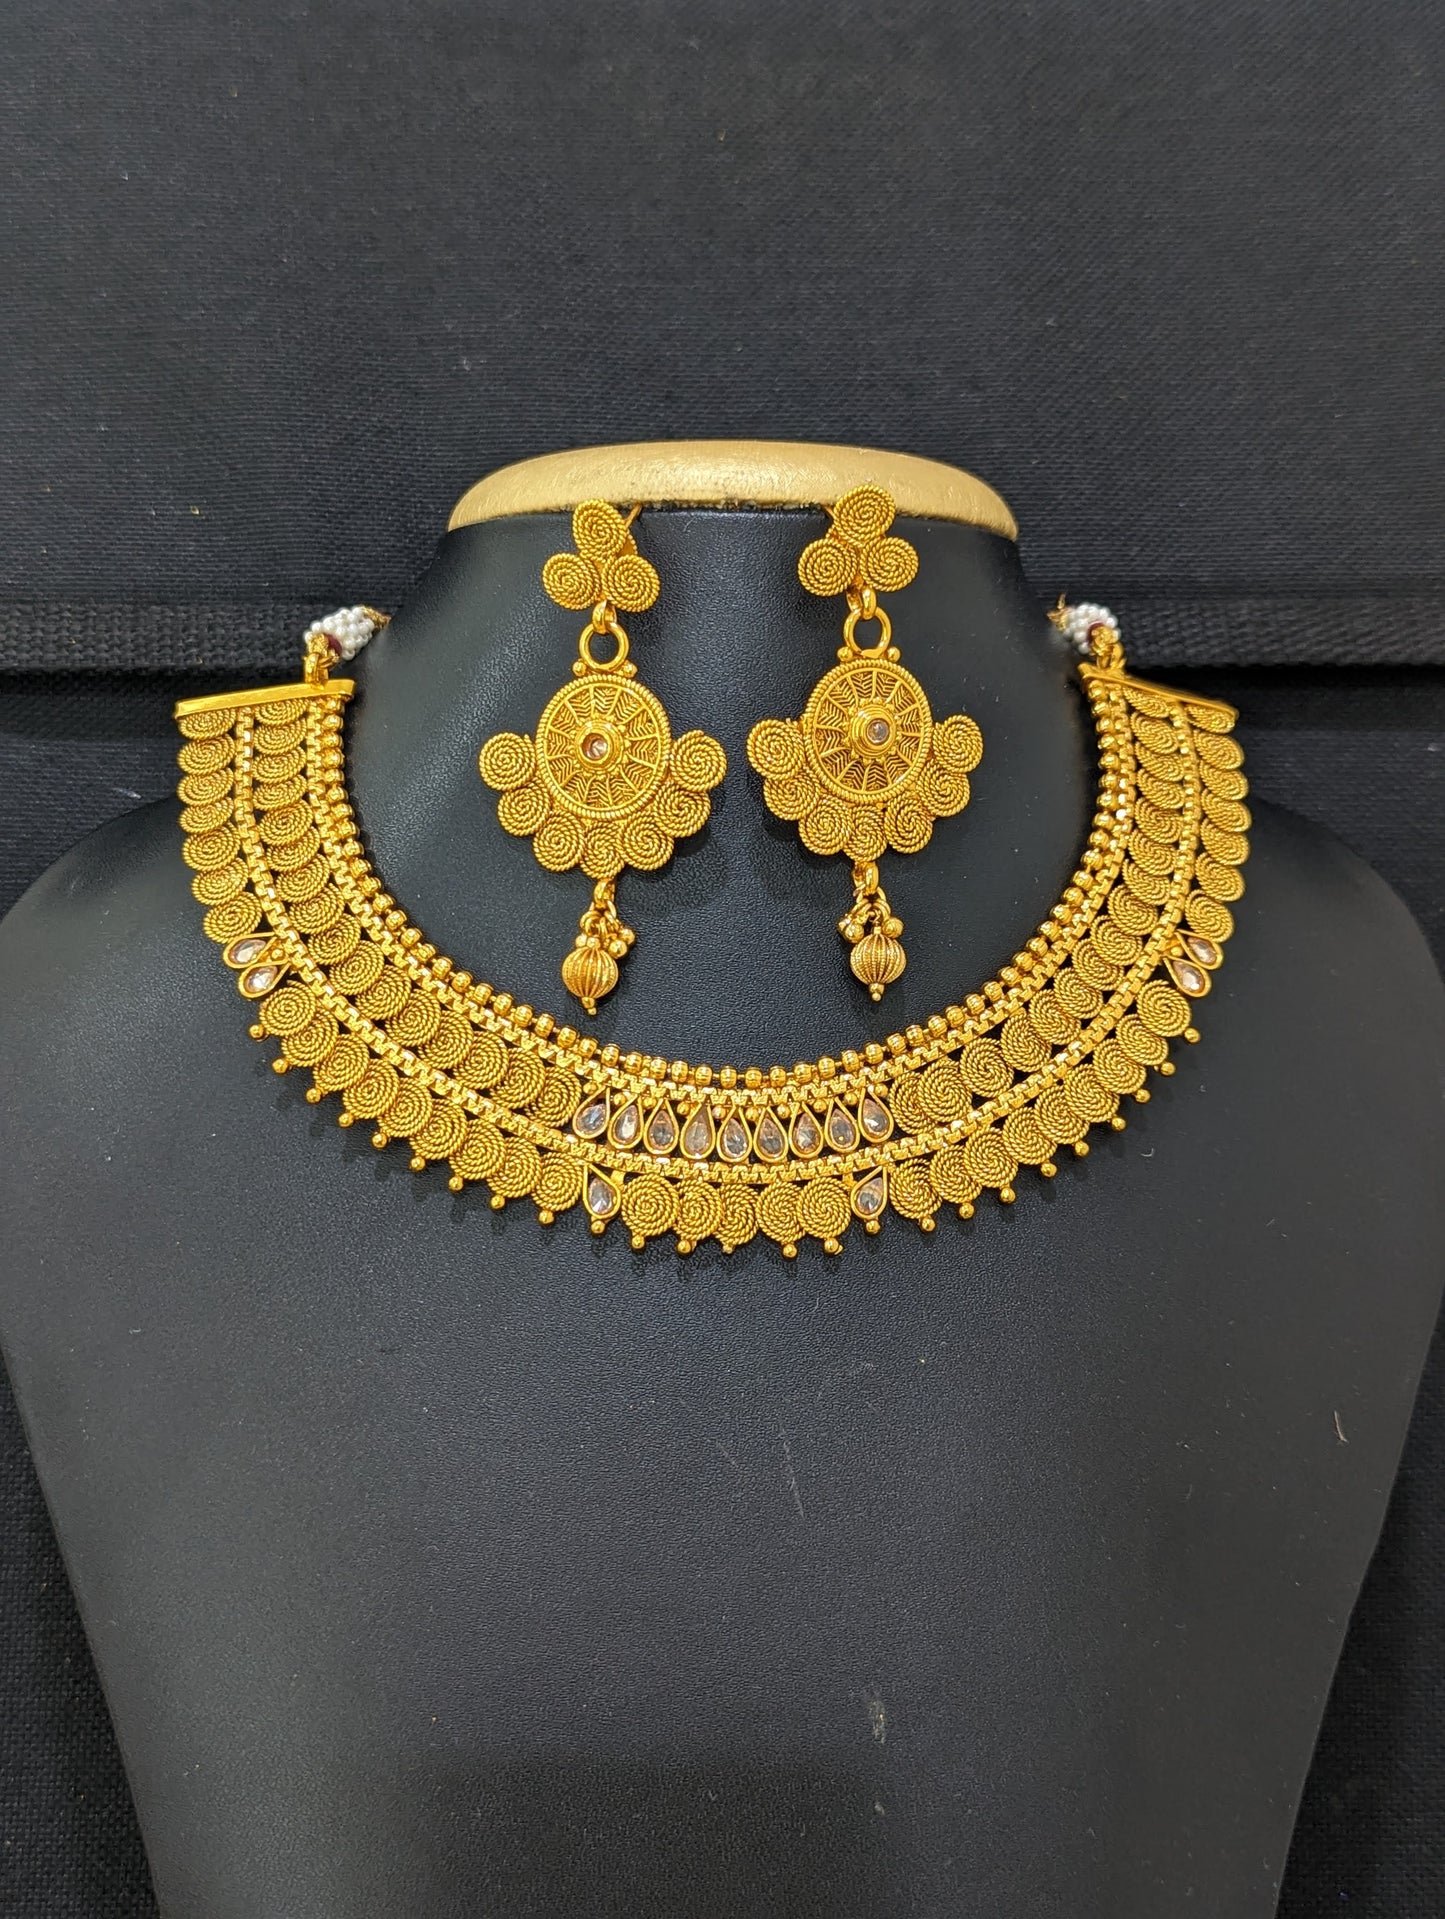 Real gold replica design Choker Necklace and Earrings set - Design 4